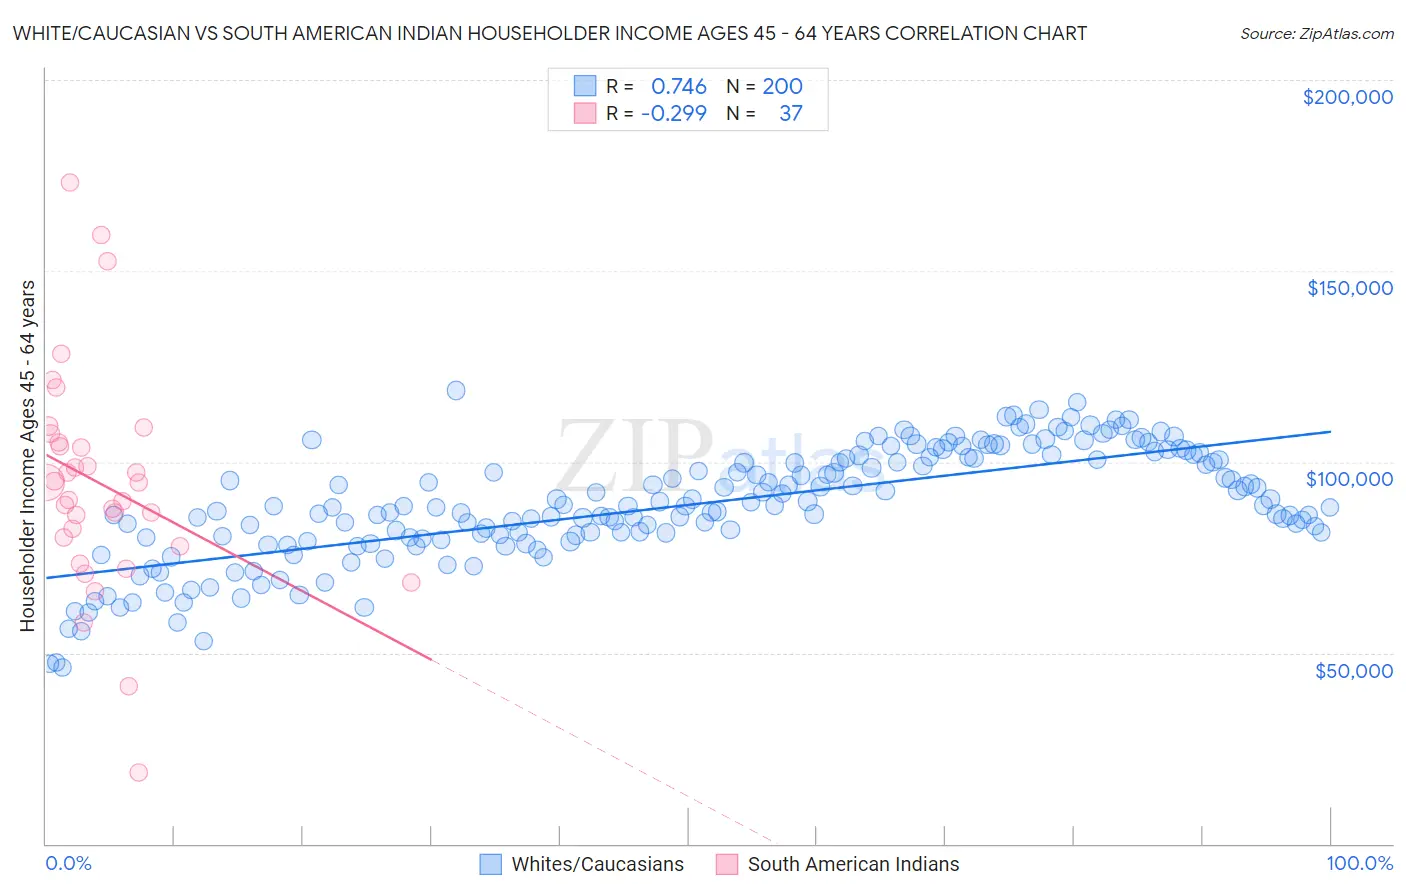 White/Caucasian vs South American Indian Householder Income Ages 45 - 64 years